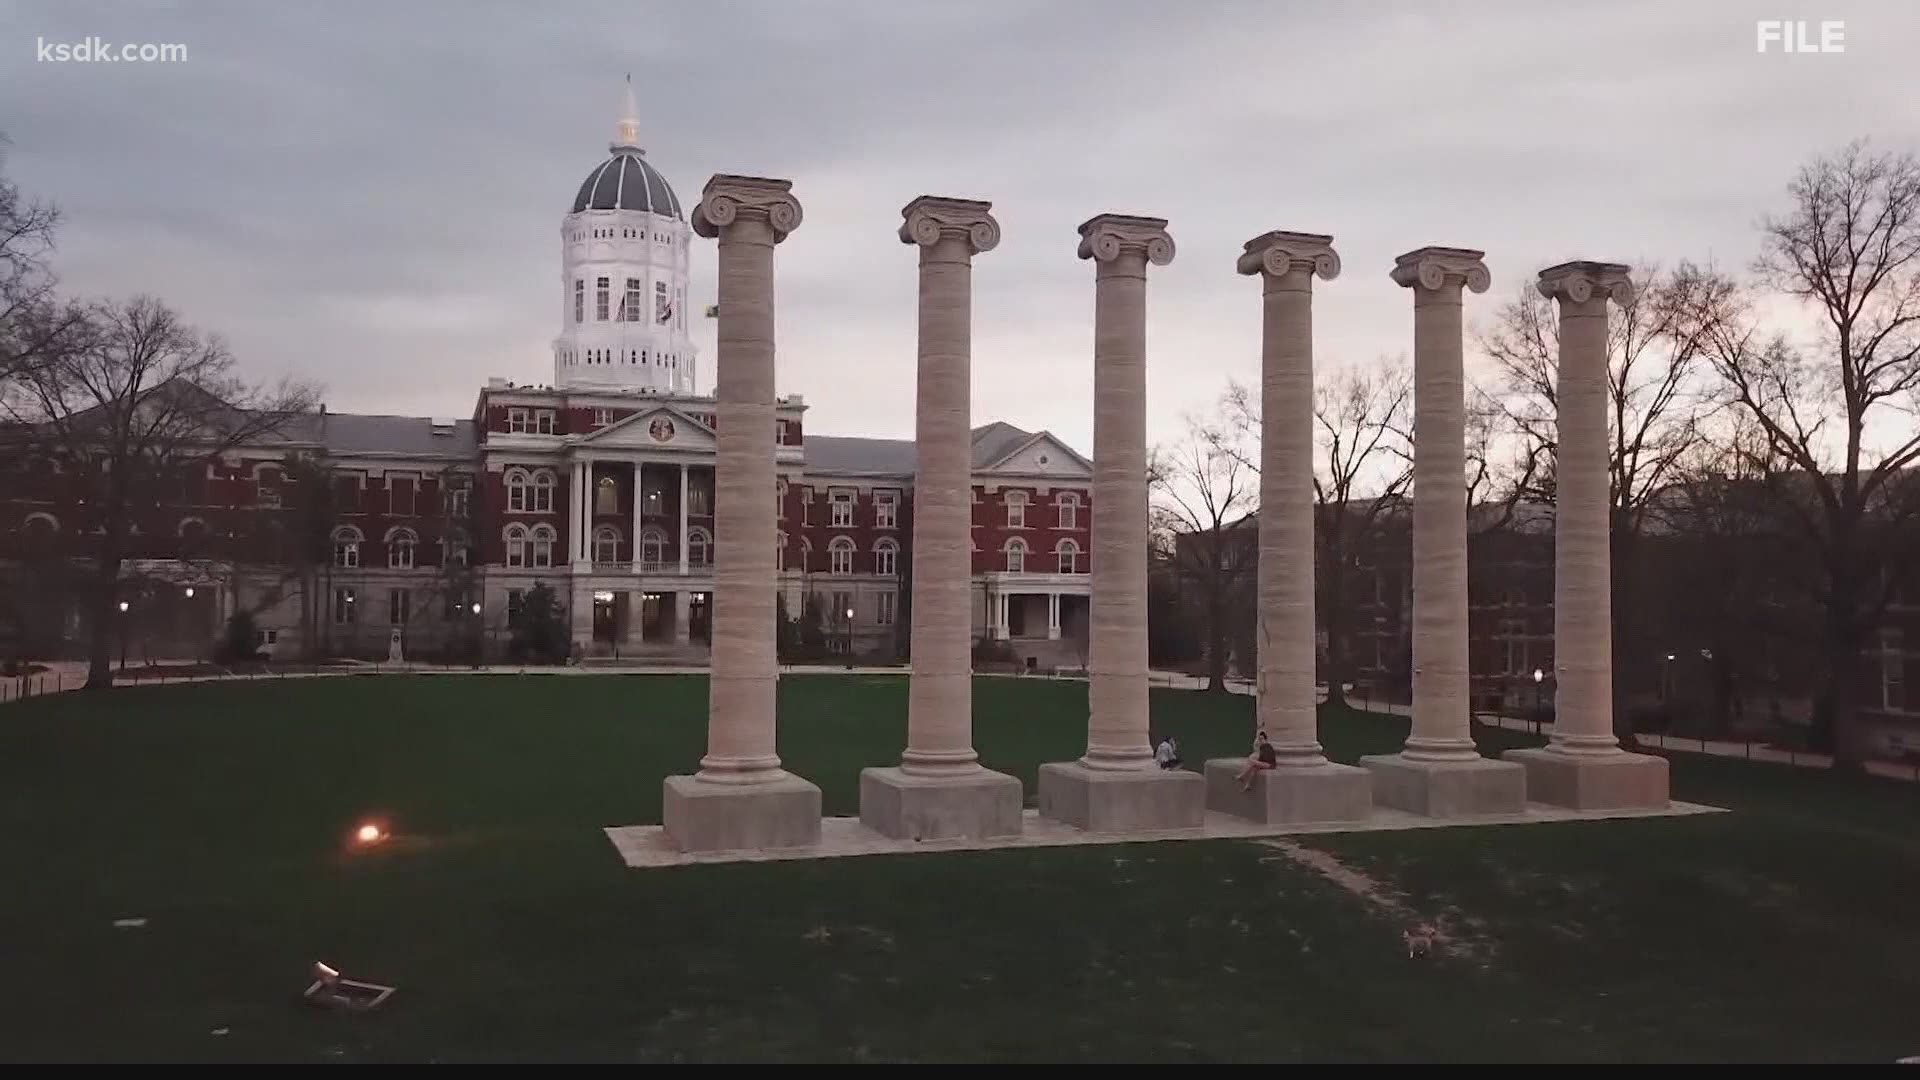 University of Missouri System employees may bring guns to campus but they can’t fire them or bring other weapons